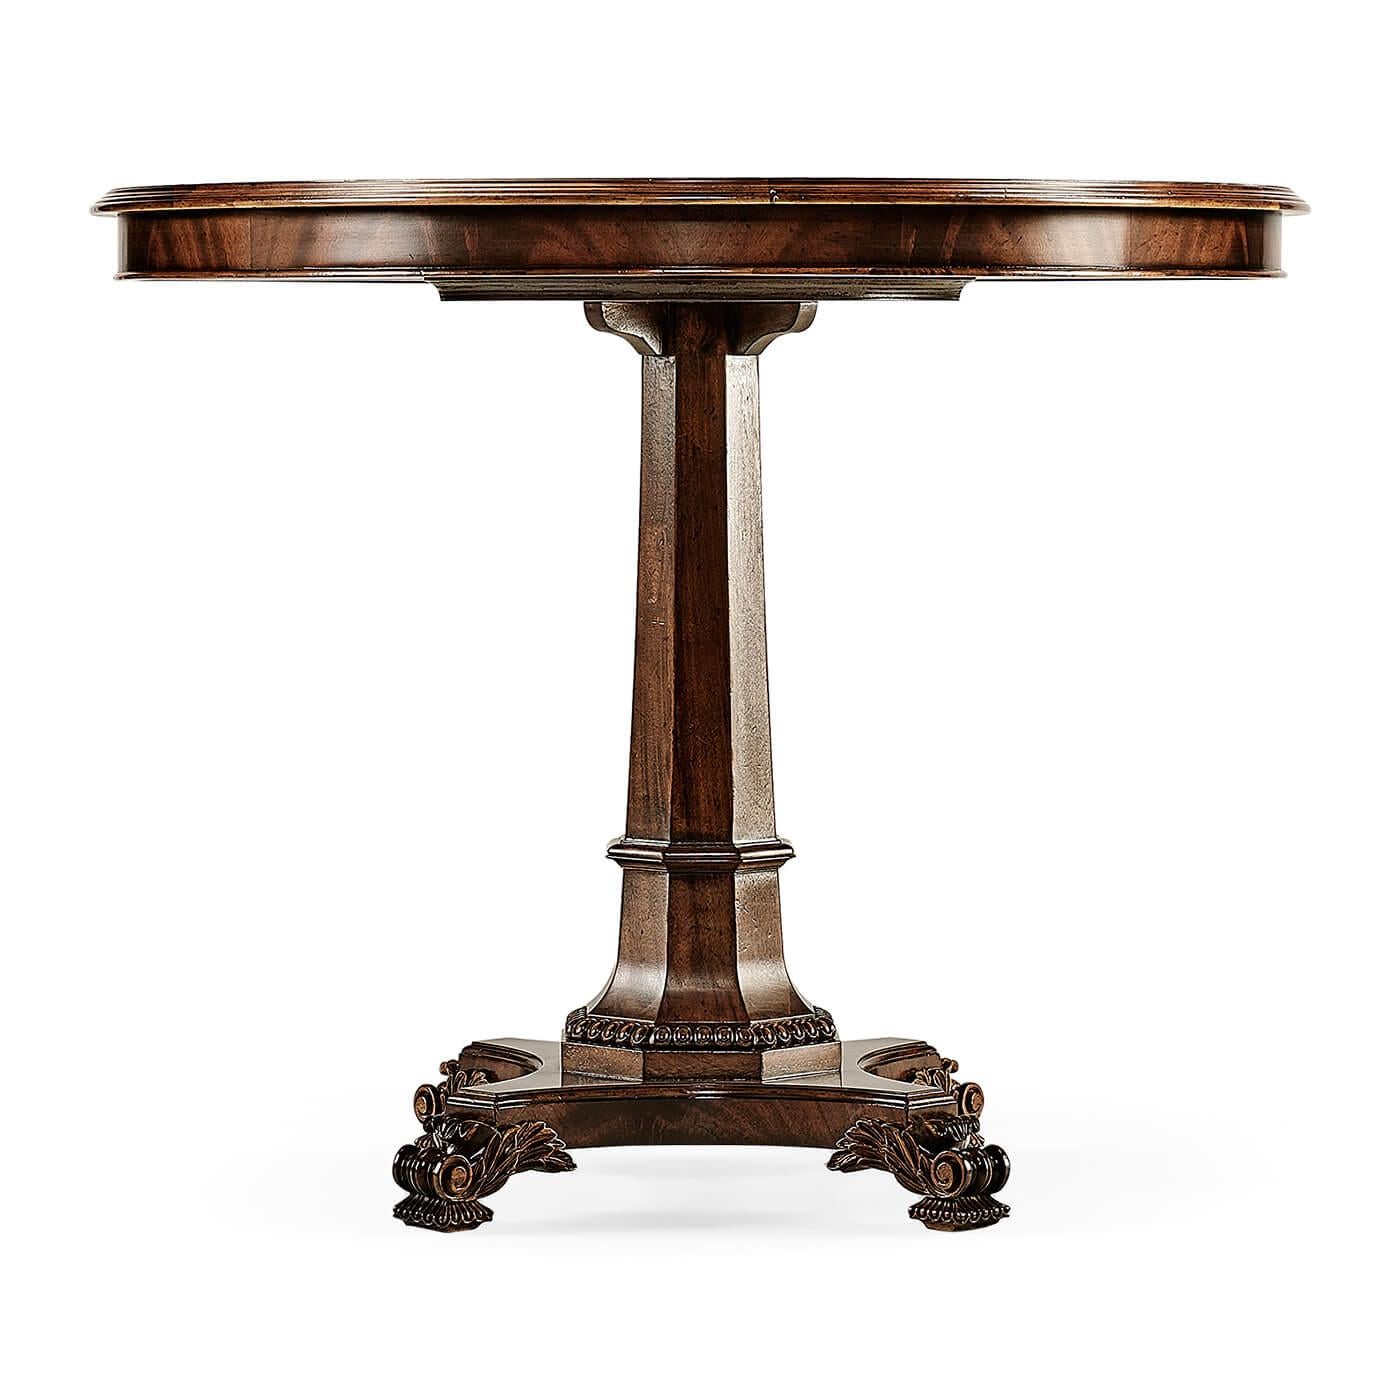 Regency style figured mahogany round center table with crossbanding and octagonal inlays. The octagonal tapering pedestal base supported by acanthus carved feet.

Dimensions: 36